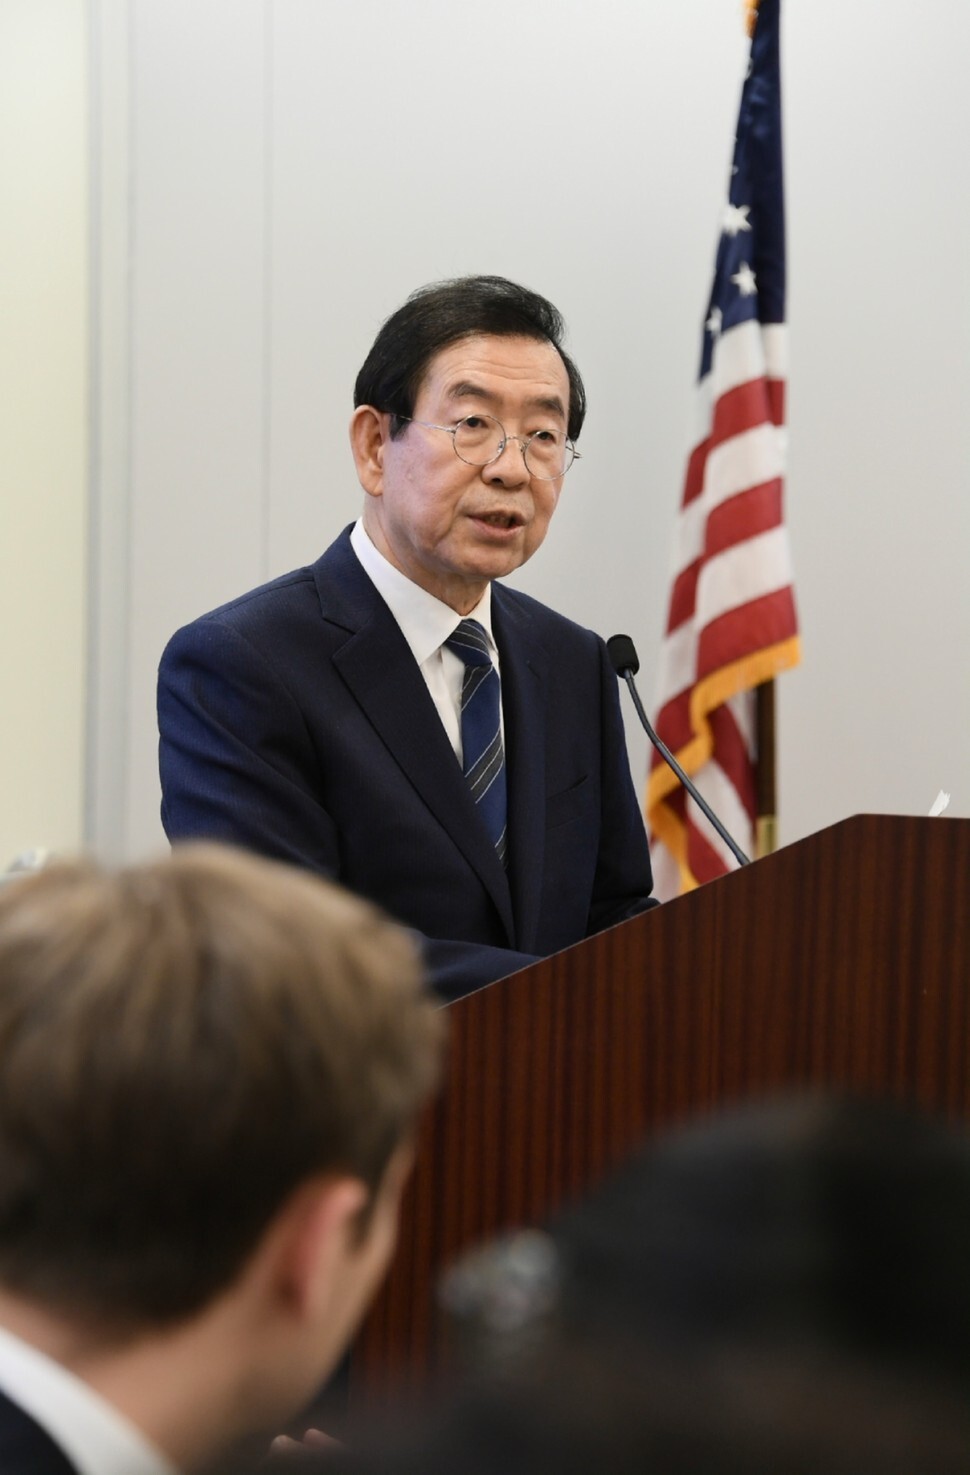 Seoul Mayor Park Won-soon gives a speech at the Council of Foreign Relations in Washington, DC, on Jan. 13. (provided by the Seoul Metropolitan Government)